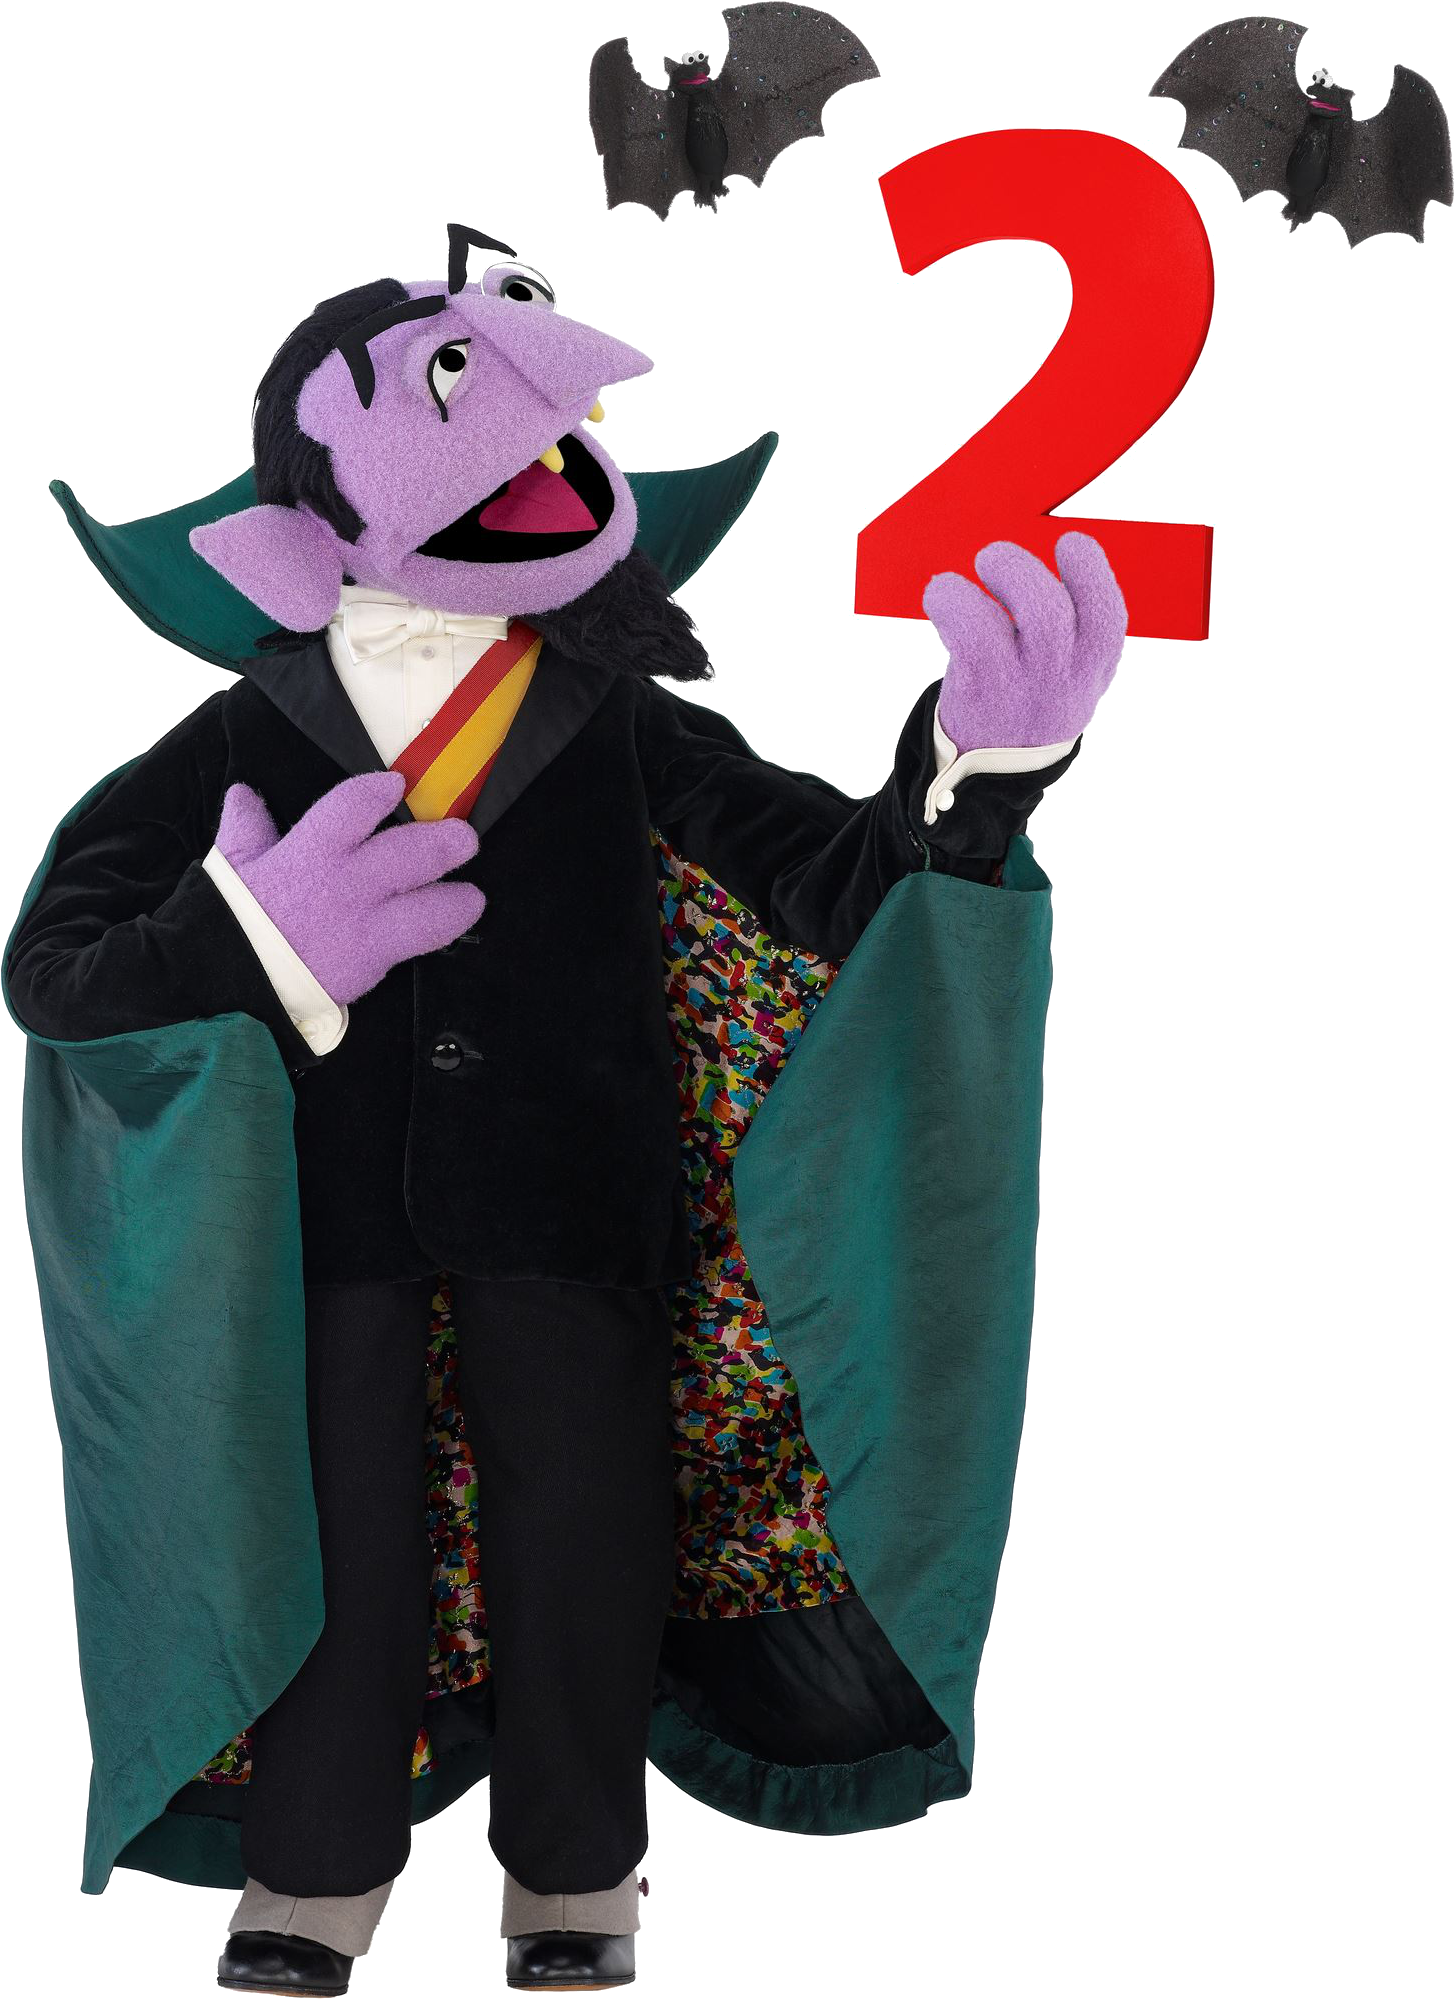 A Purple Puppet Holding A Red Number